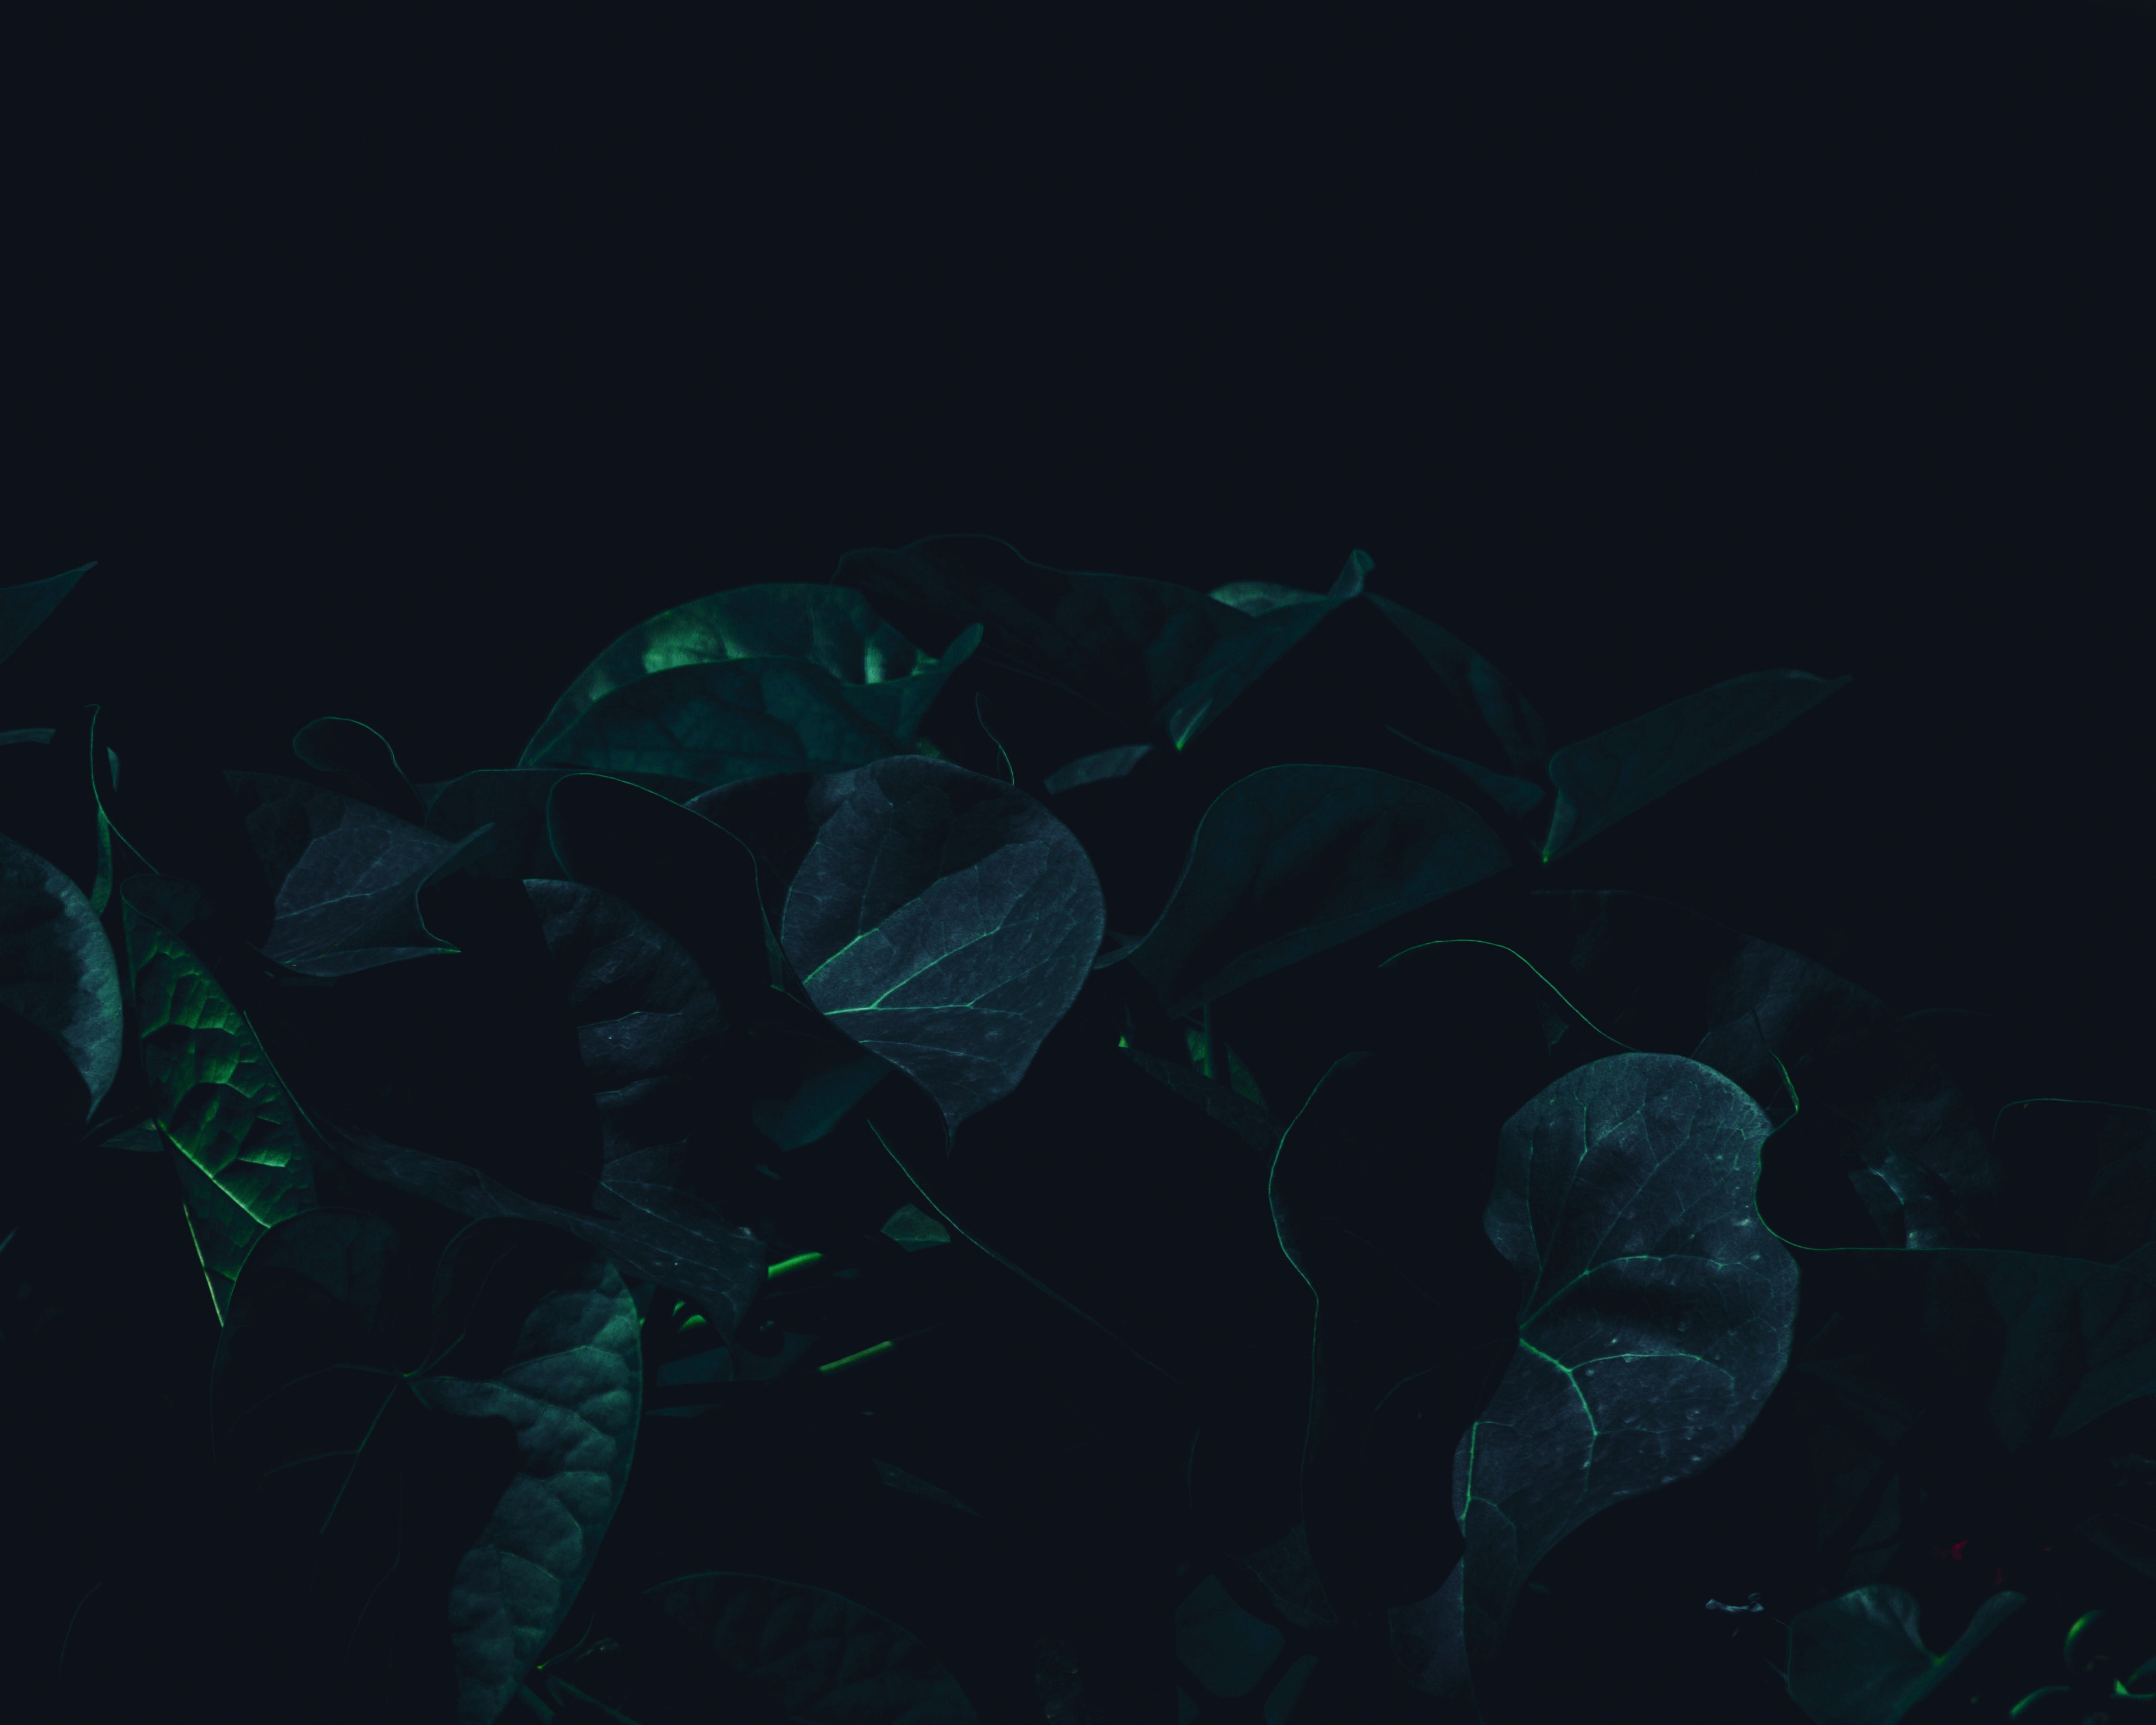 dark, leaves, green, plant, shadows images